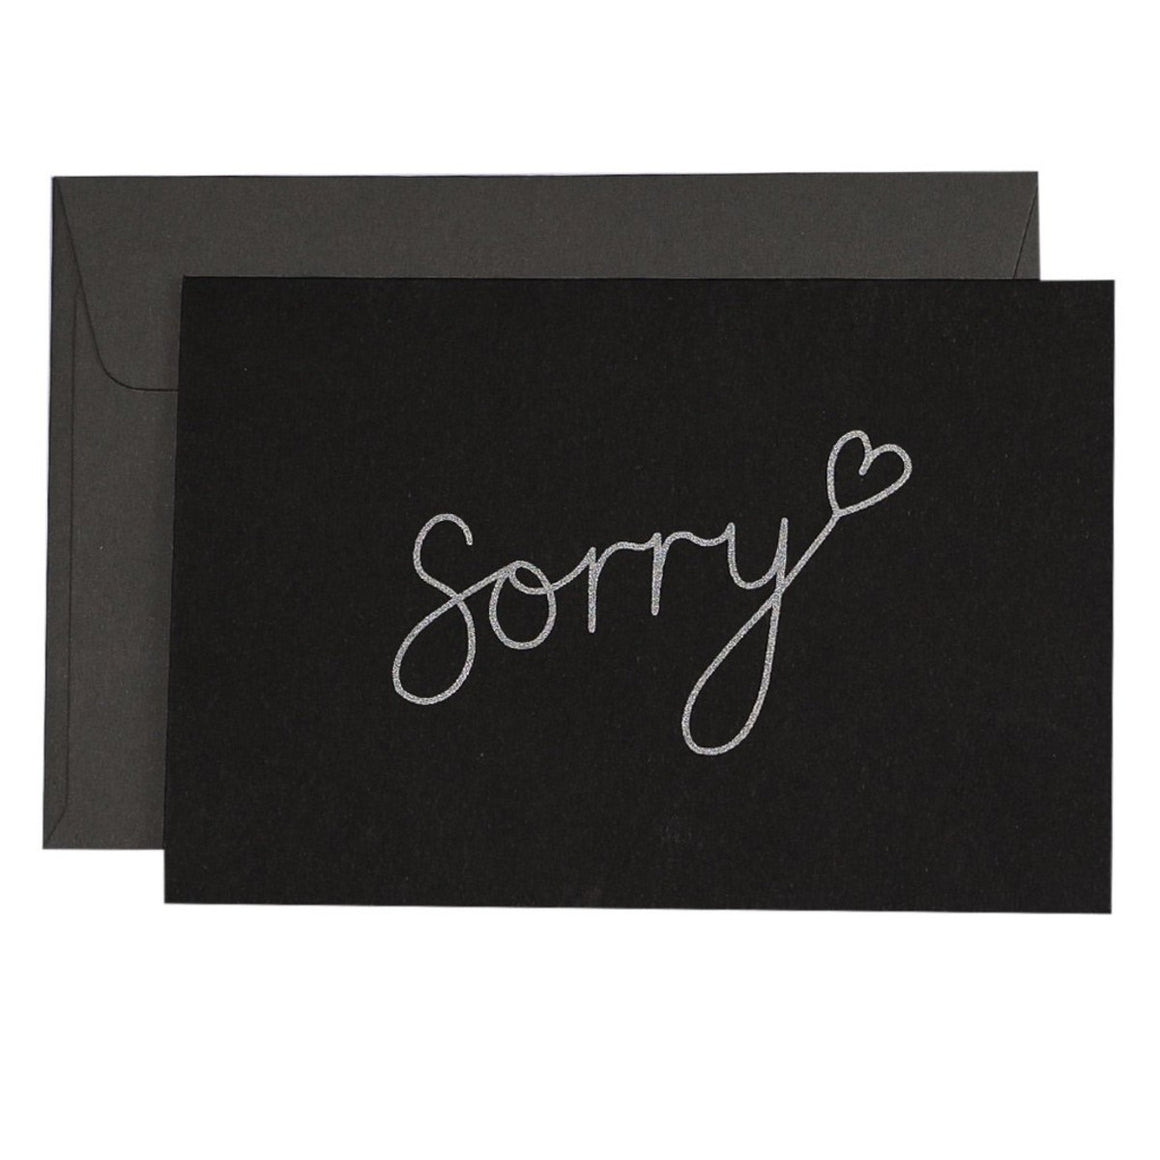 Black Greeting Card with silver text saying sorry in a cursive font, finished with a love heart.